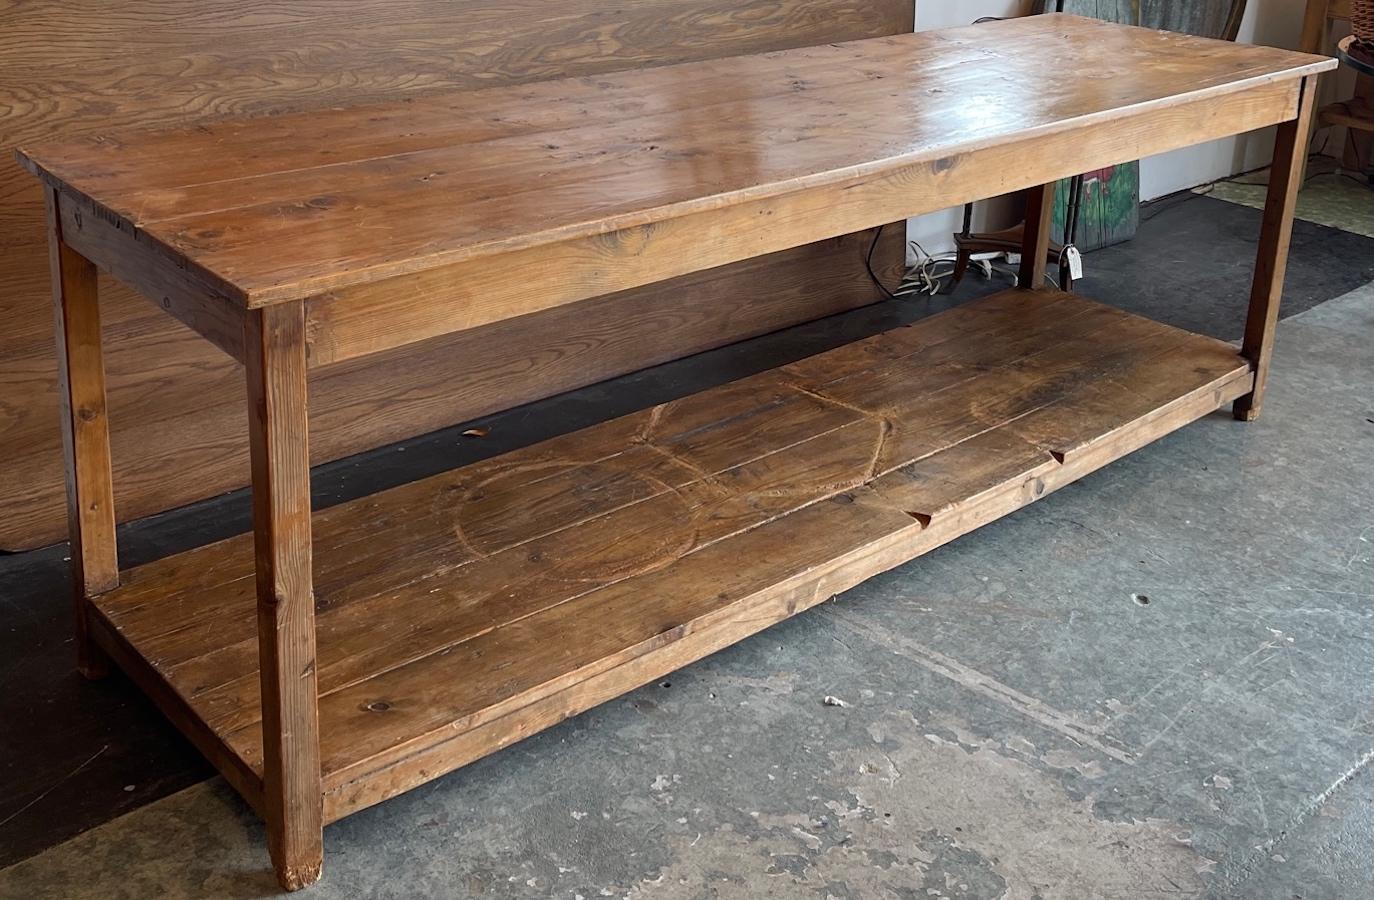 This is a 19th century counter from a store in France. It has a lower shelf for storage. We think this would make a great 8 foot dining table.